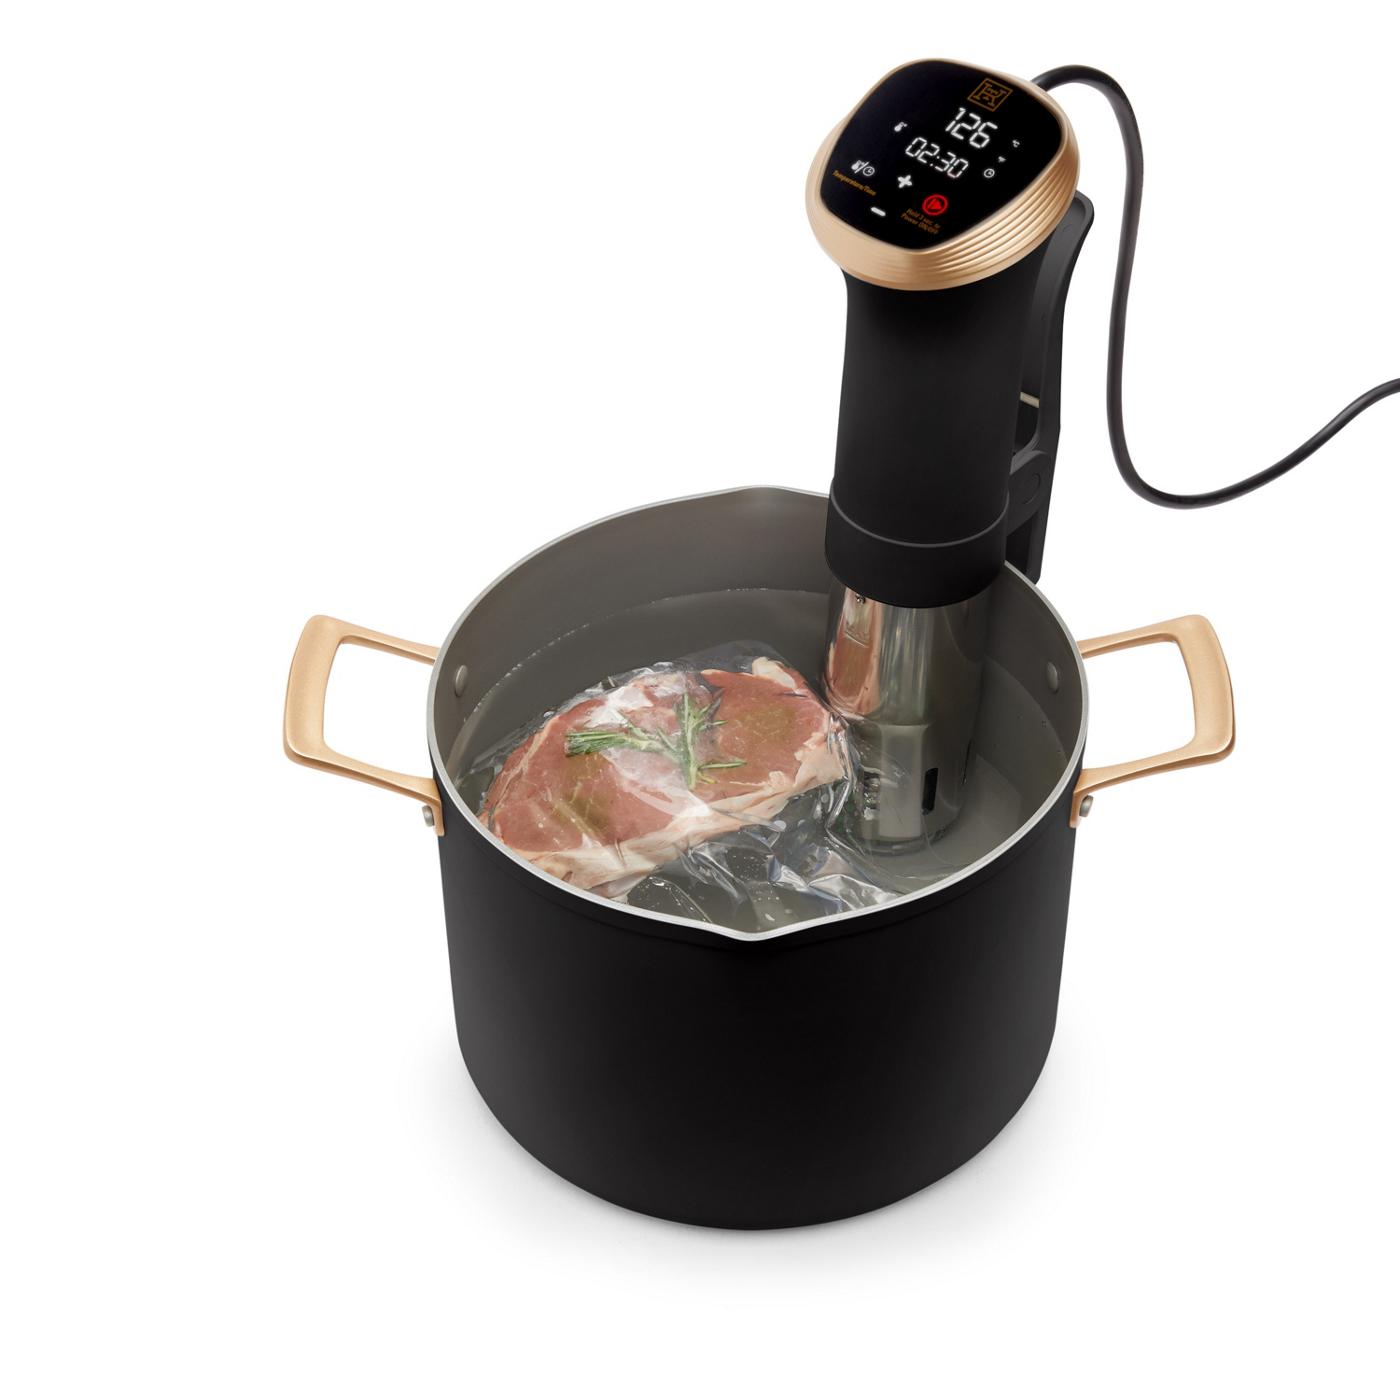 Kitchen & Table by H-E-B Sous Vide Precision Cooker - Classic Black; image 6 of 6